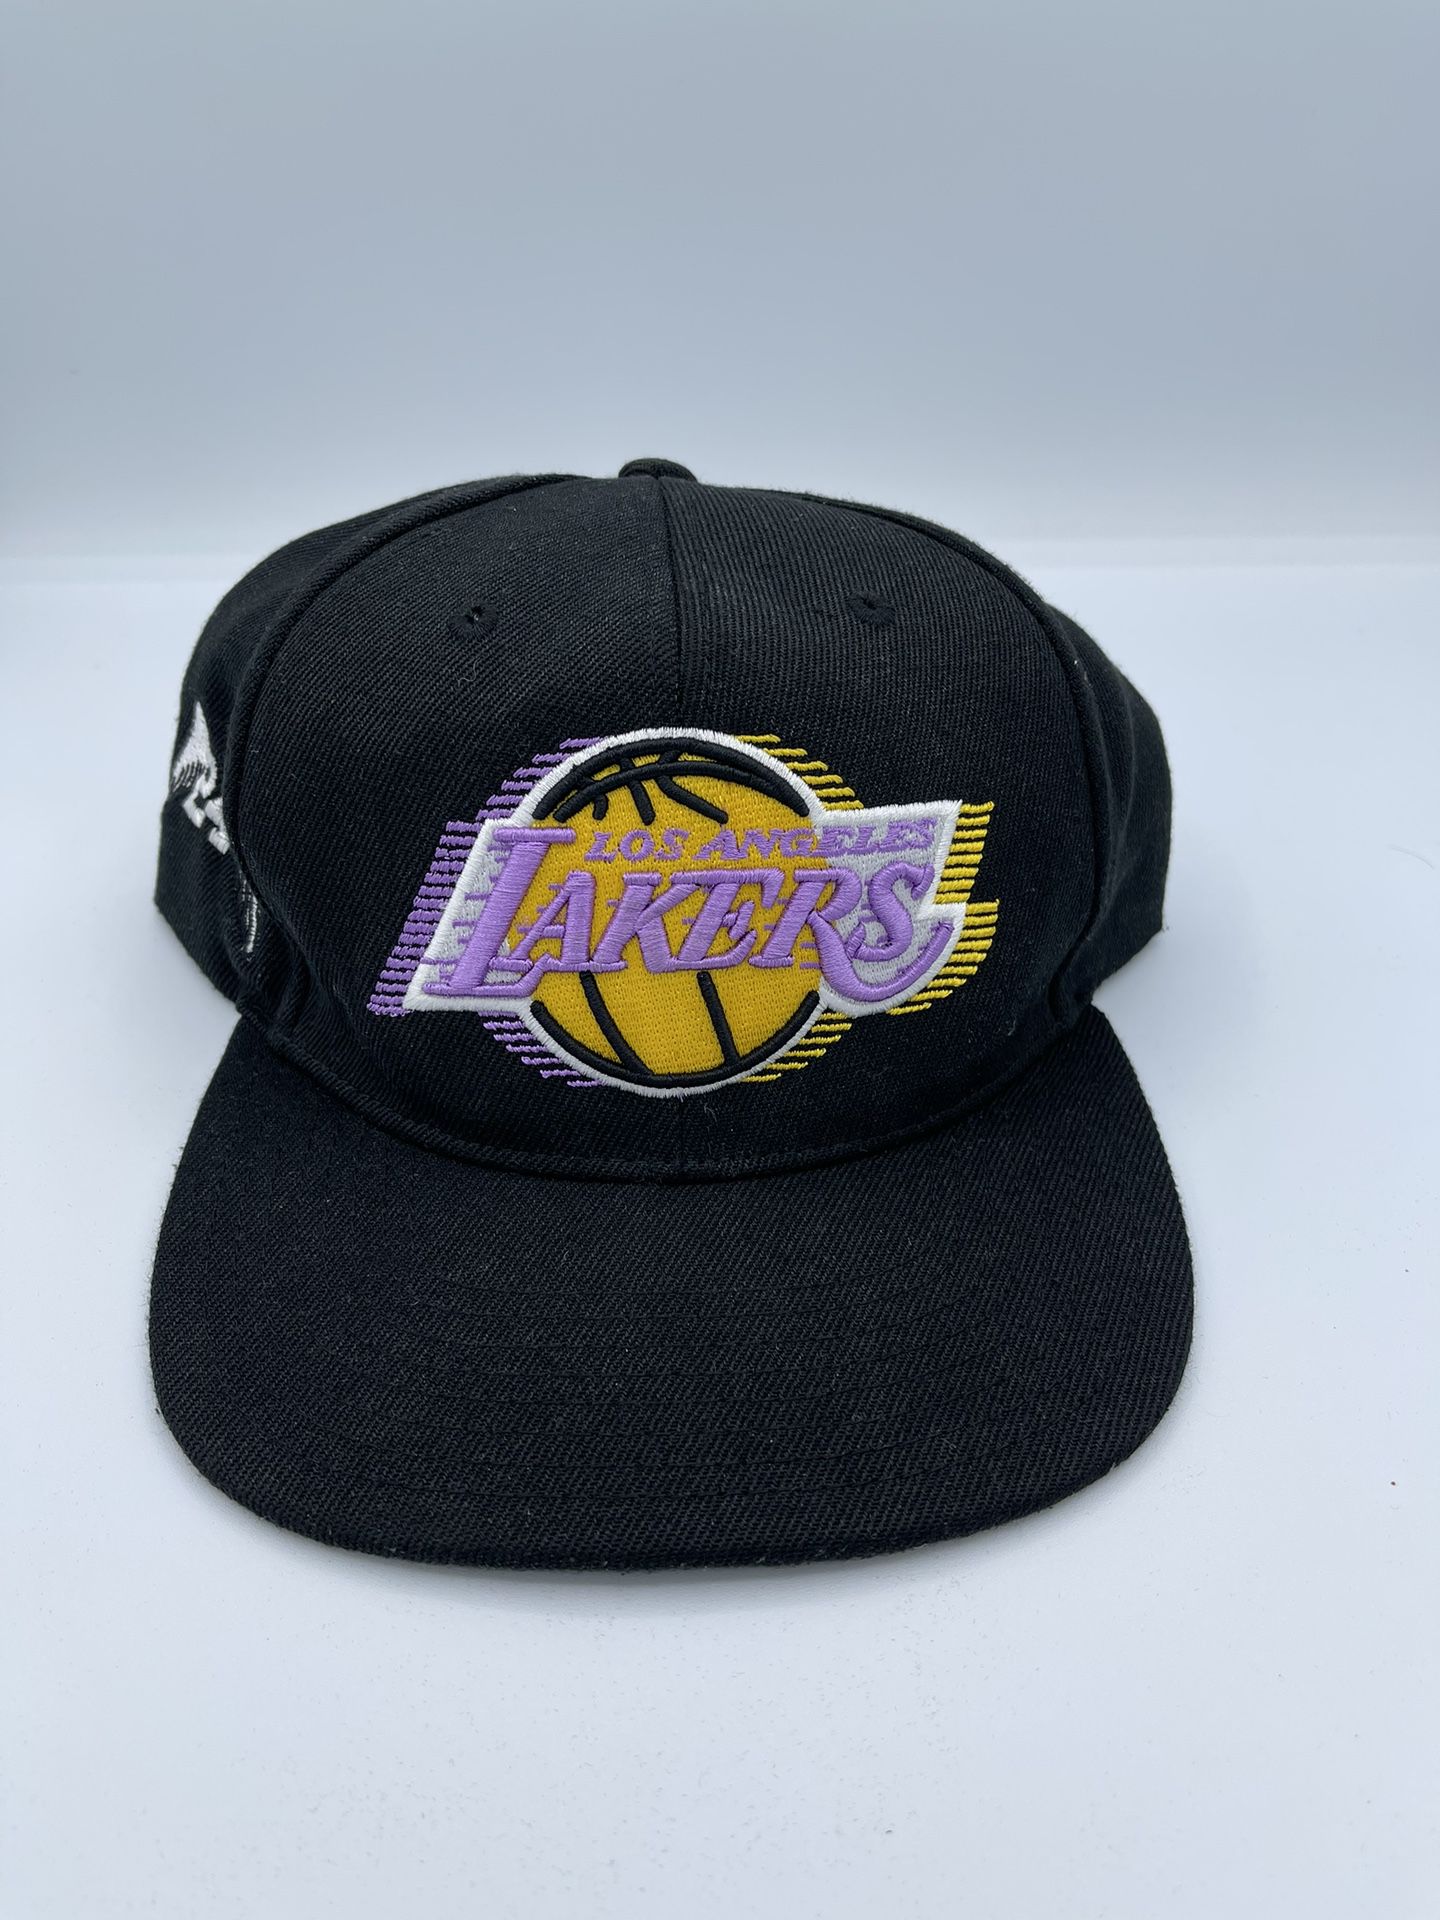 Los Angeles Lakers Mitchell & Ness NBA Snapback Hat Cap with Kobe's #24 for  Sale in Long Beach, CA - OfferUp